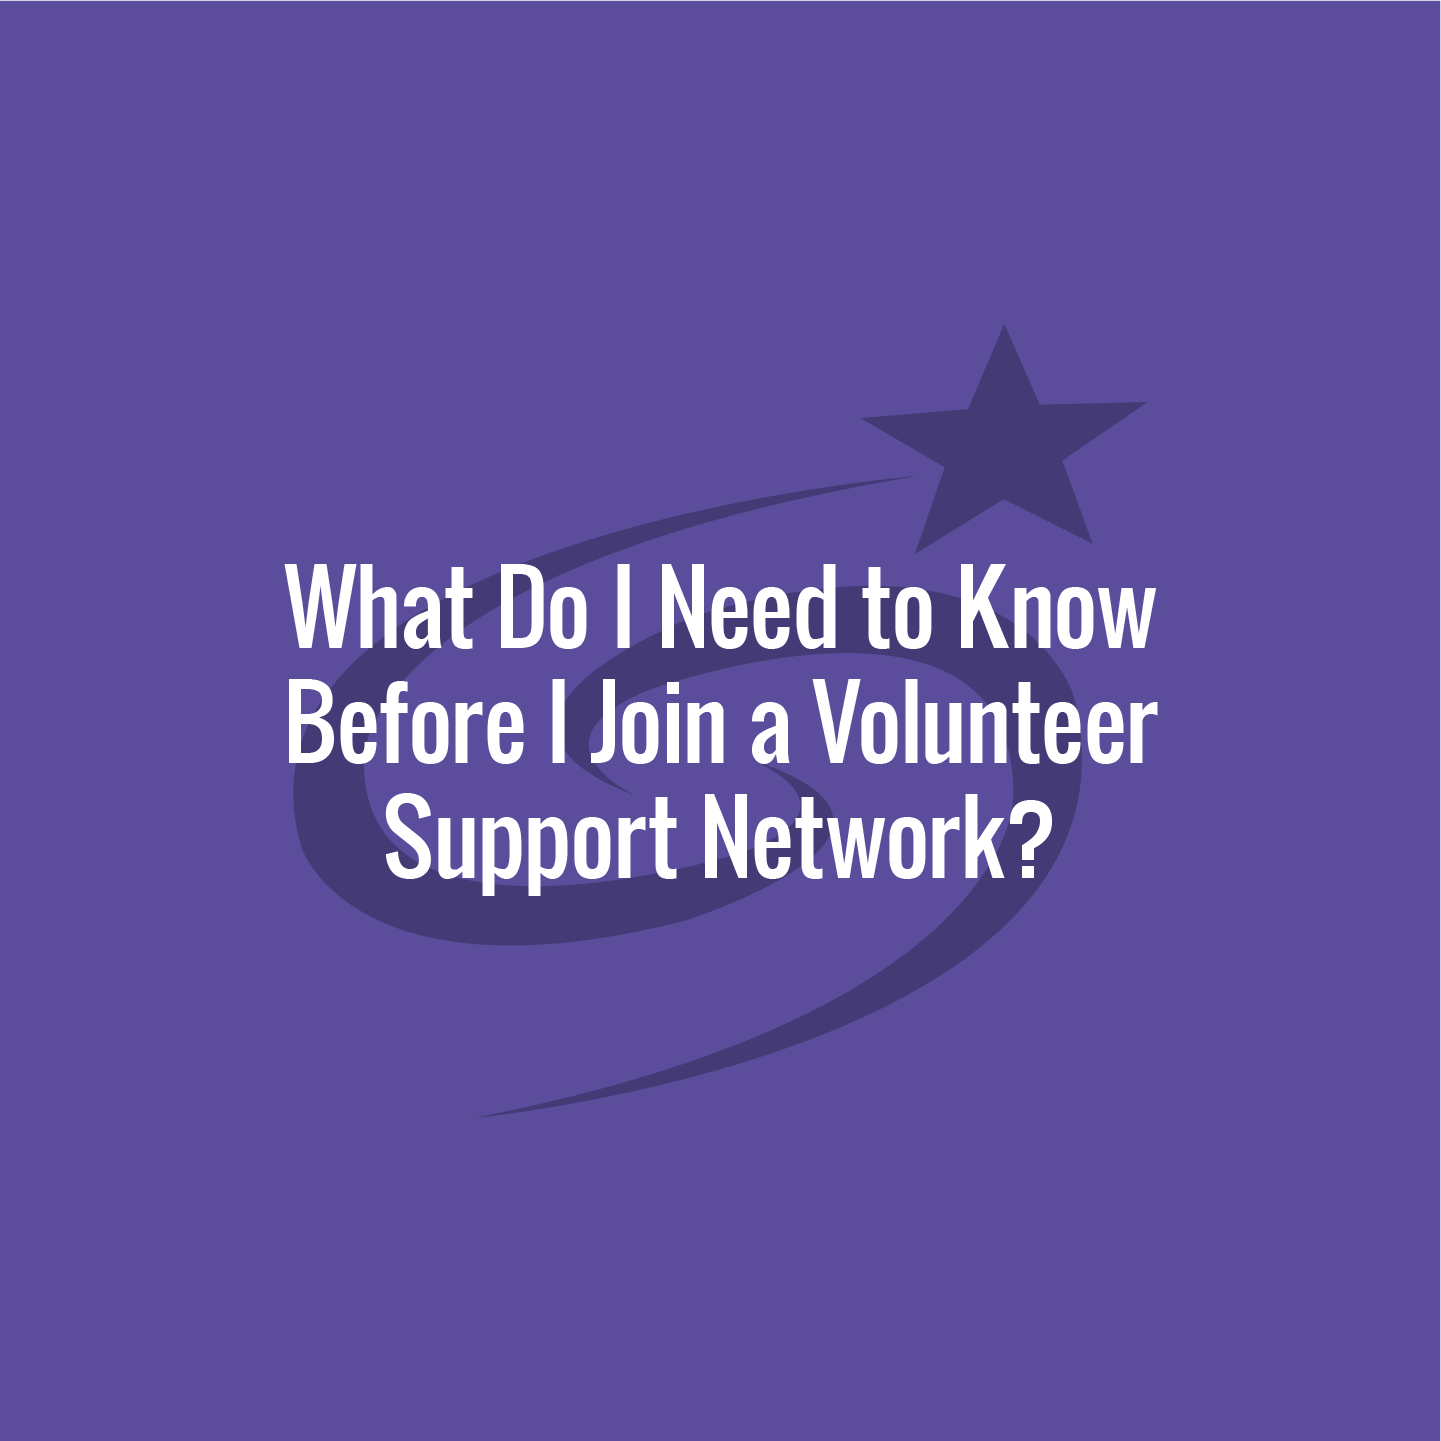 What Do I Need to Know Before I Join a Volunteer Support Network?